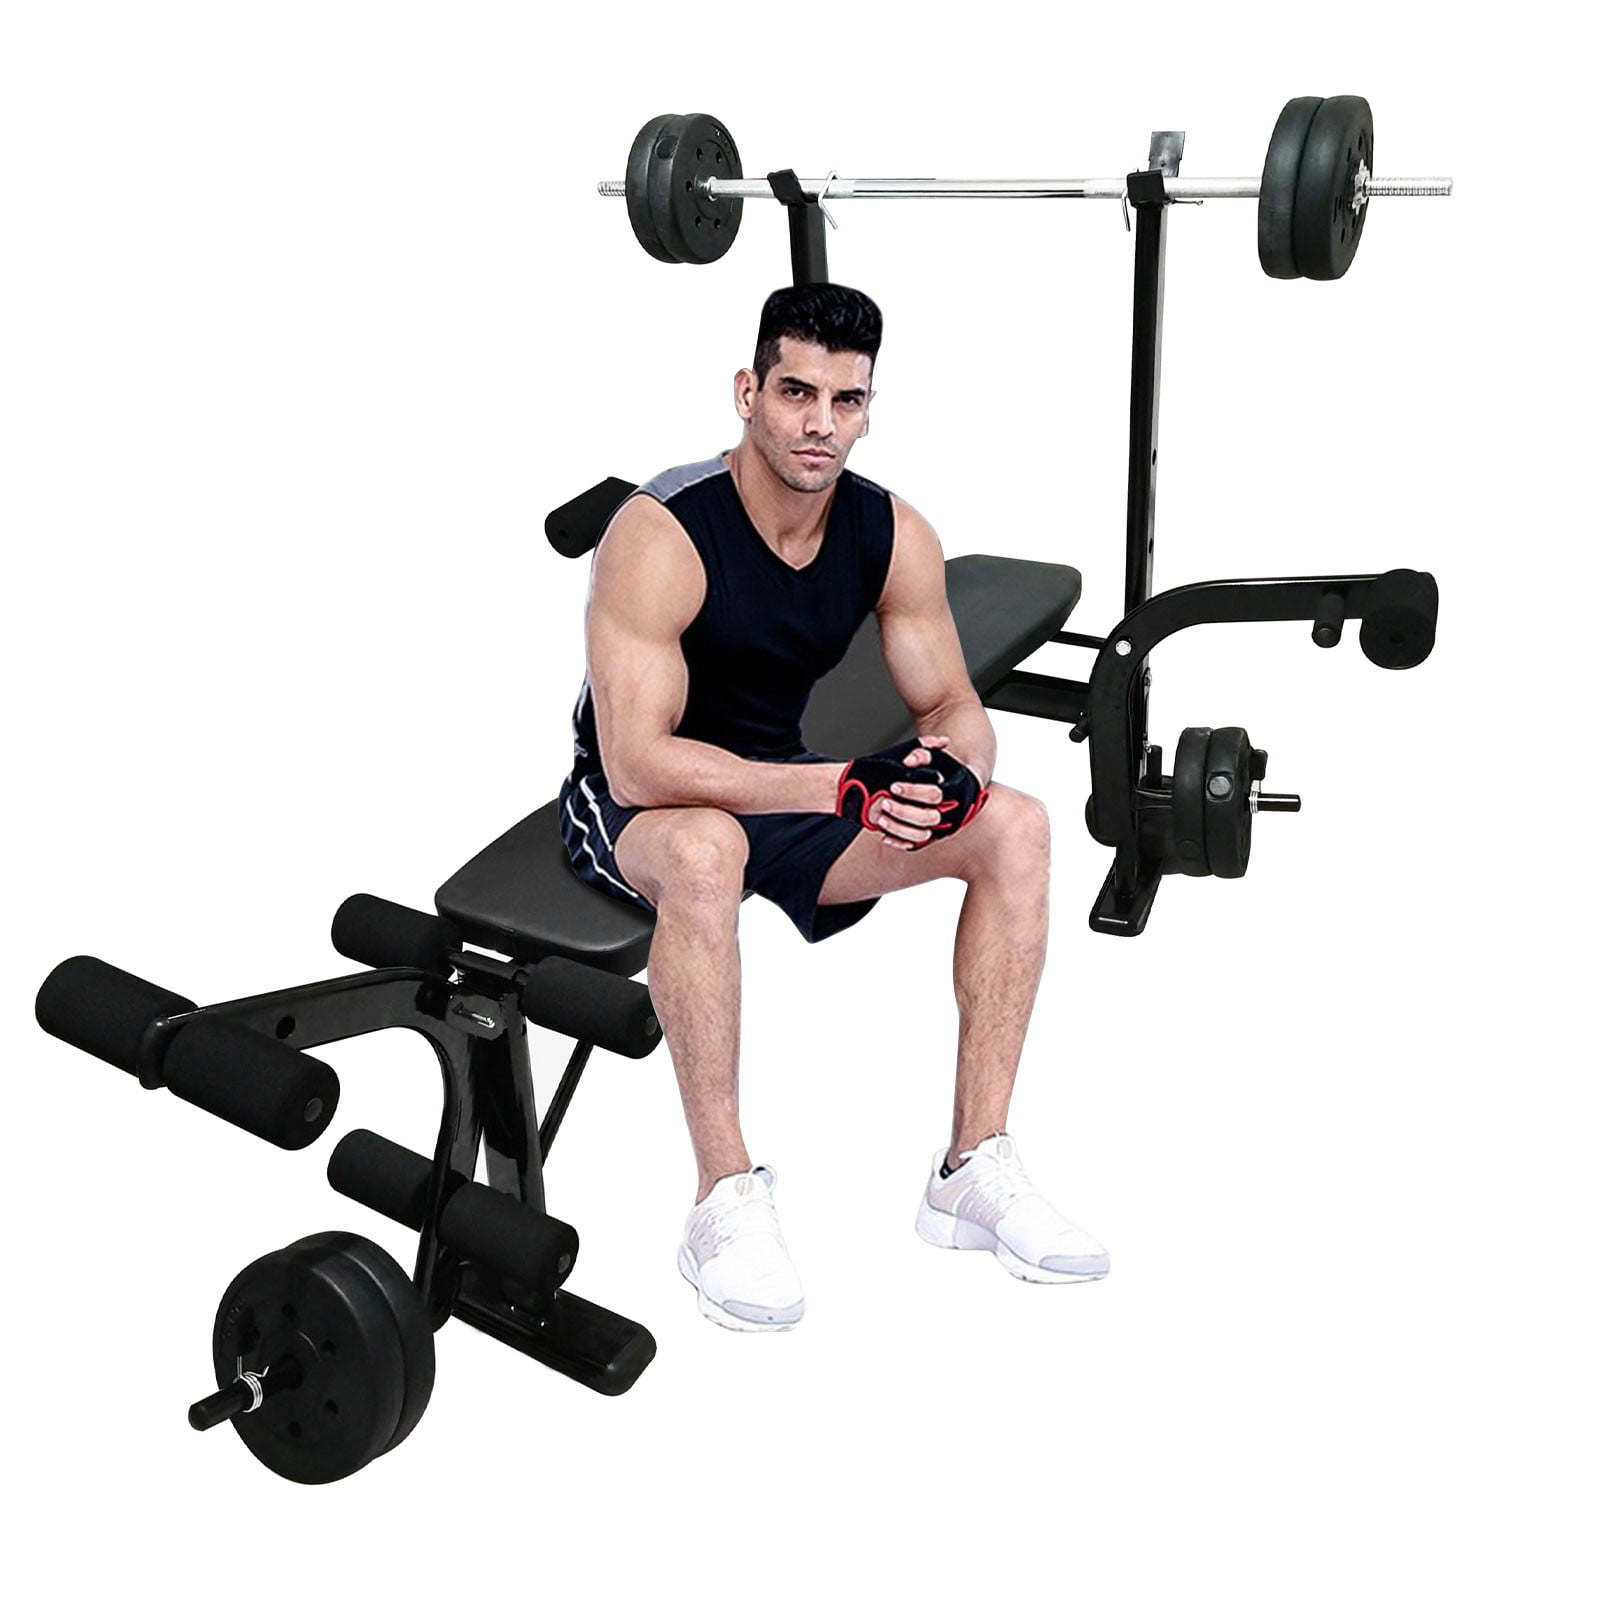 Hongyans Dumbbell Racks for Weight Free Press Bench,Adjustable Solid Steel Squat Stands Lifting Body Build Exercise for Workout Fitness Barbell 